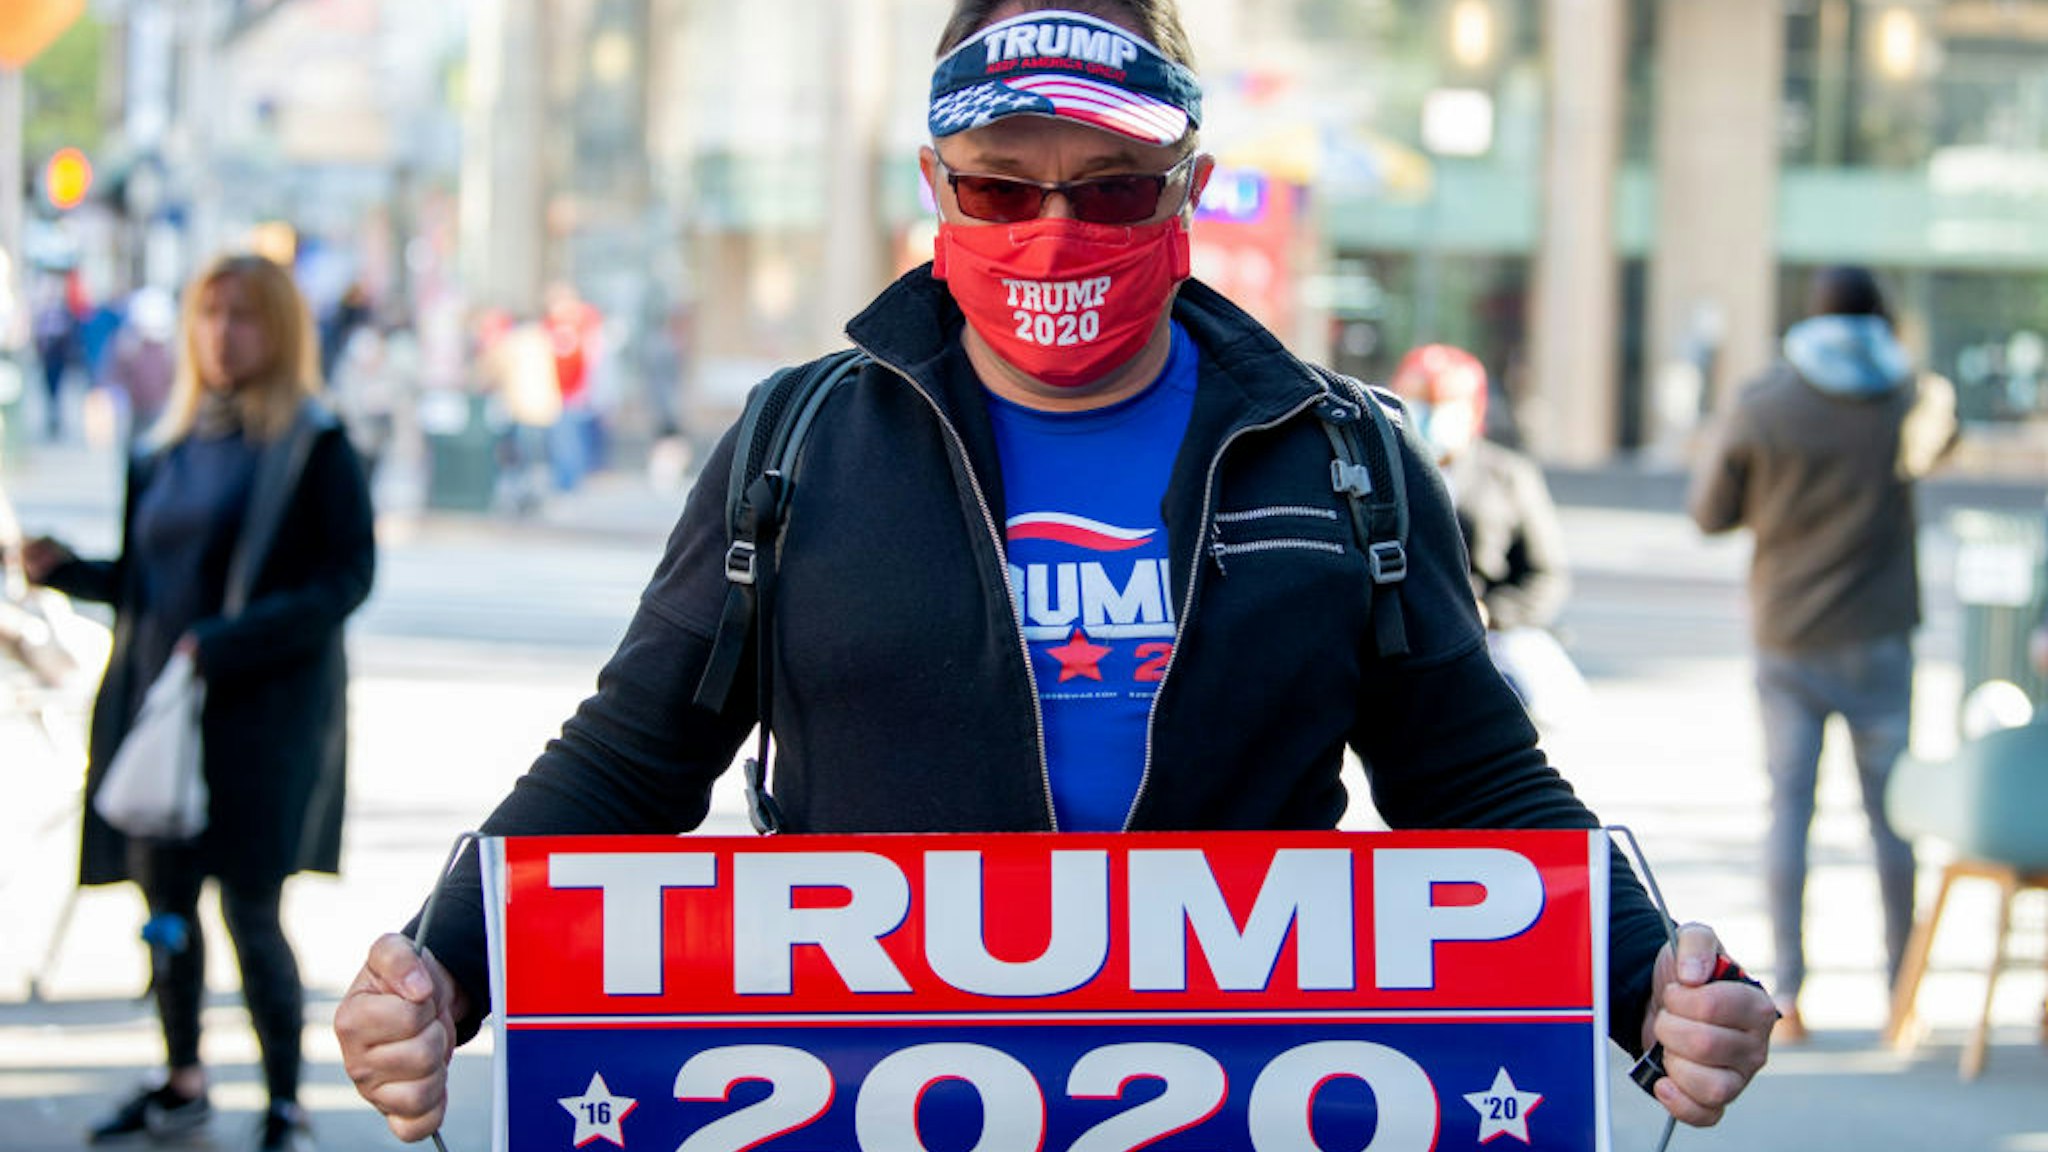 A man wearing a 'Trump 2020' mask and gear poses amid the coronavirus pandemic on May 5, 2020 in New York City. COVID-19 has spread to most countries around the world, claiming over 257,000 lives with over 3.7 million cases.